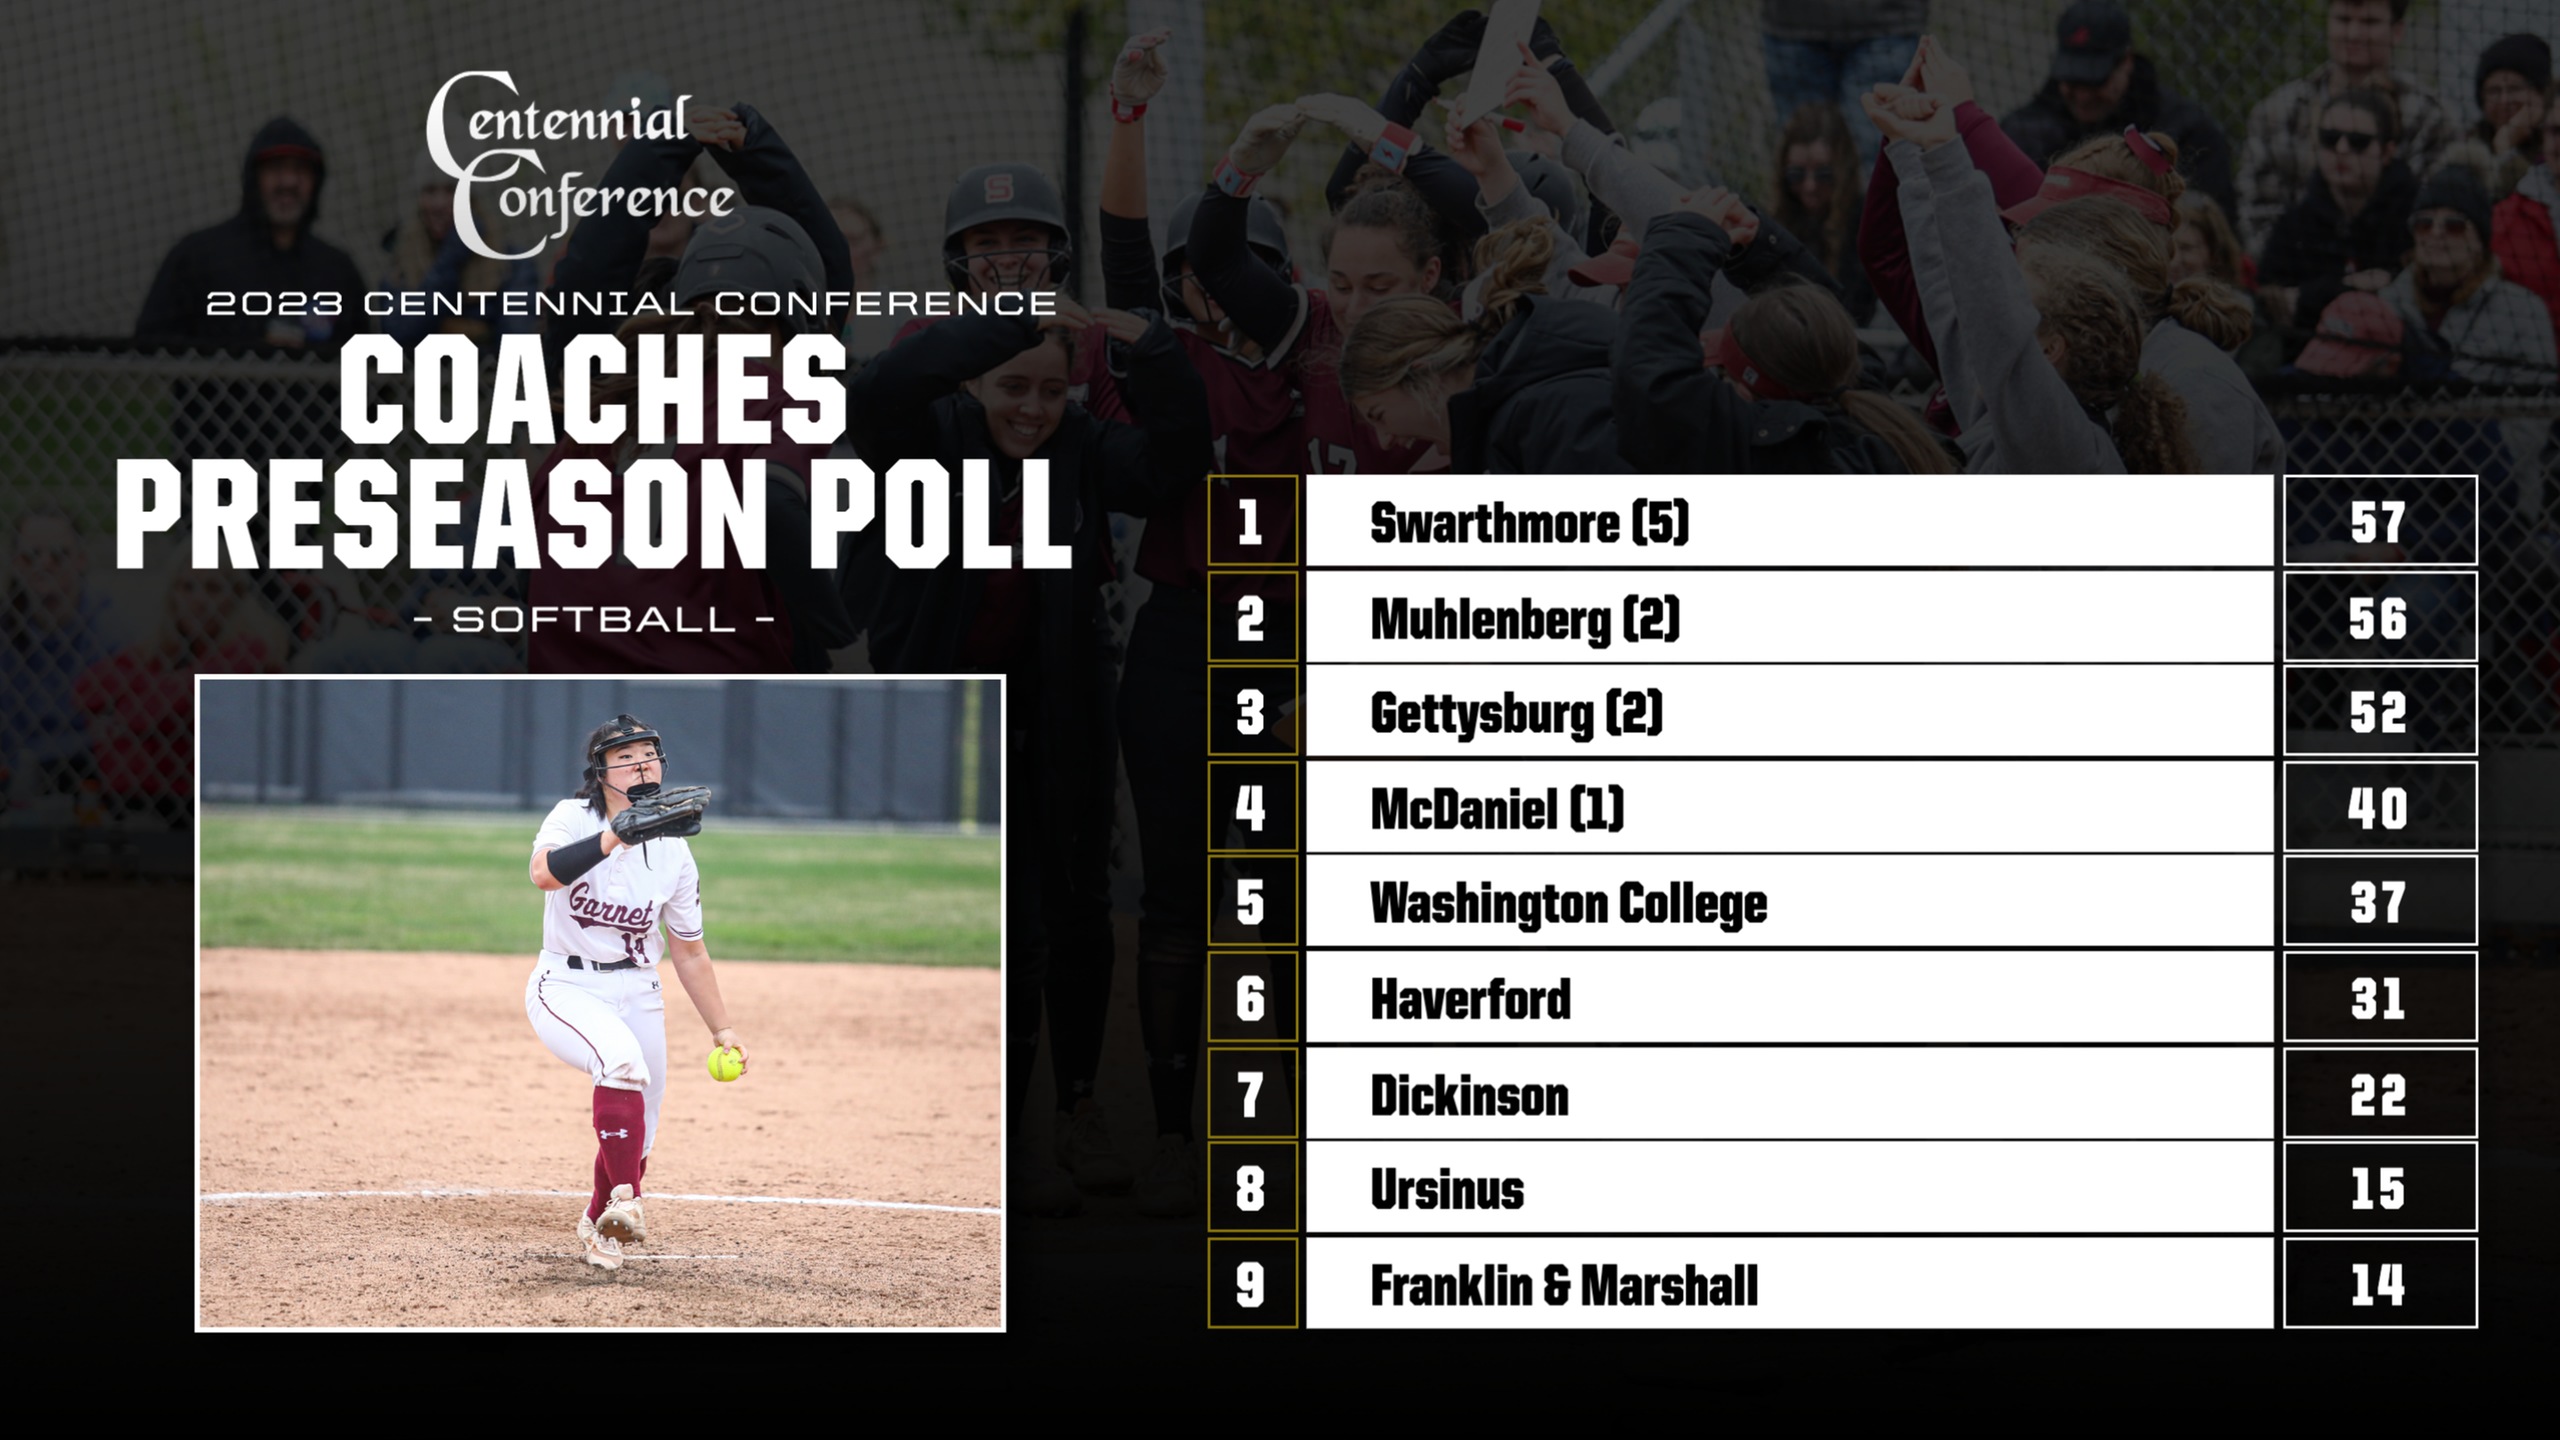 Swarthmore Edges Muhlenberg in Softball Poll; Four Receive First-Place Nods